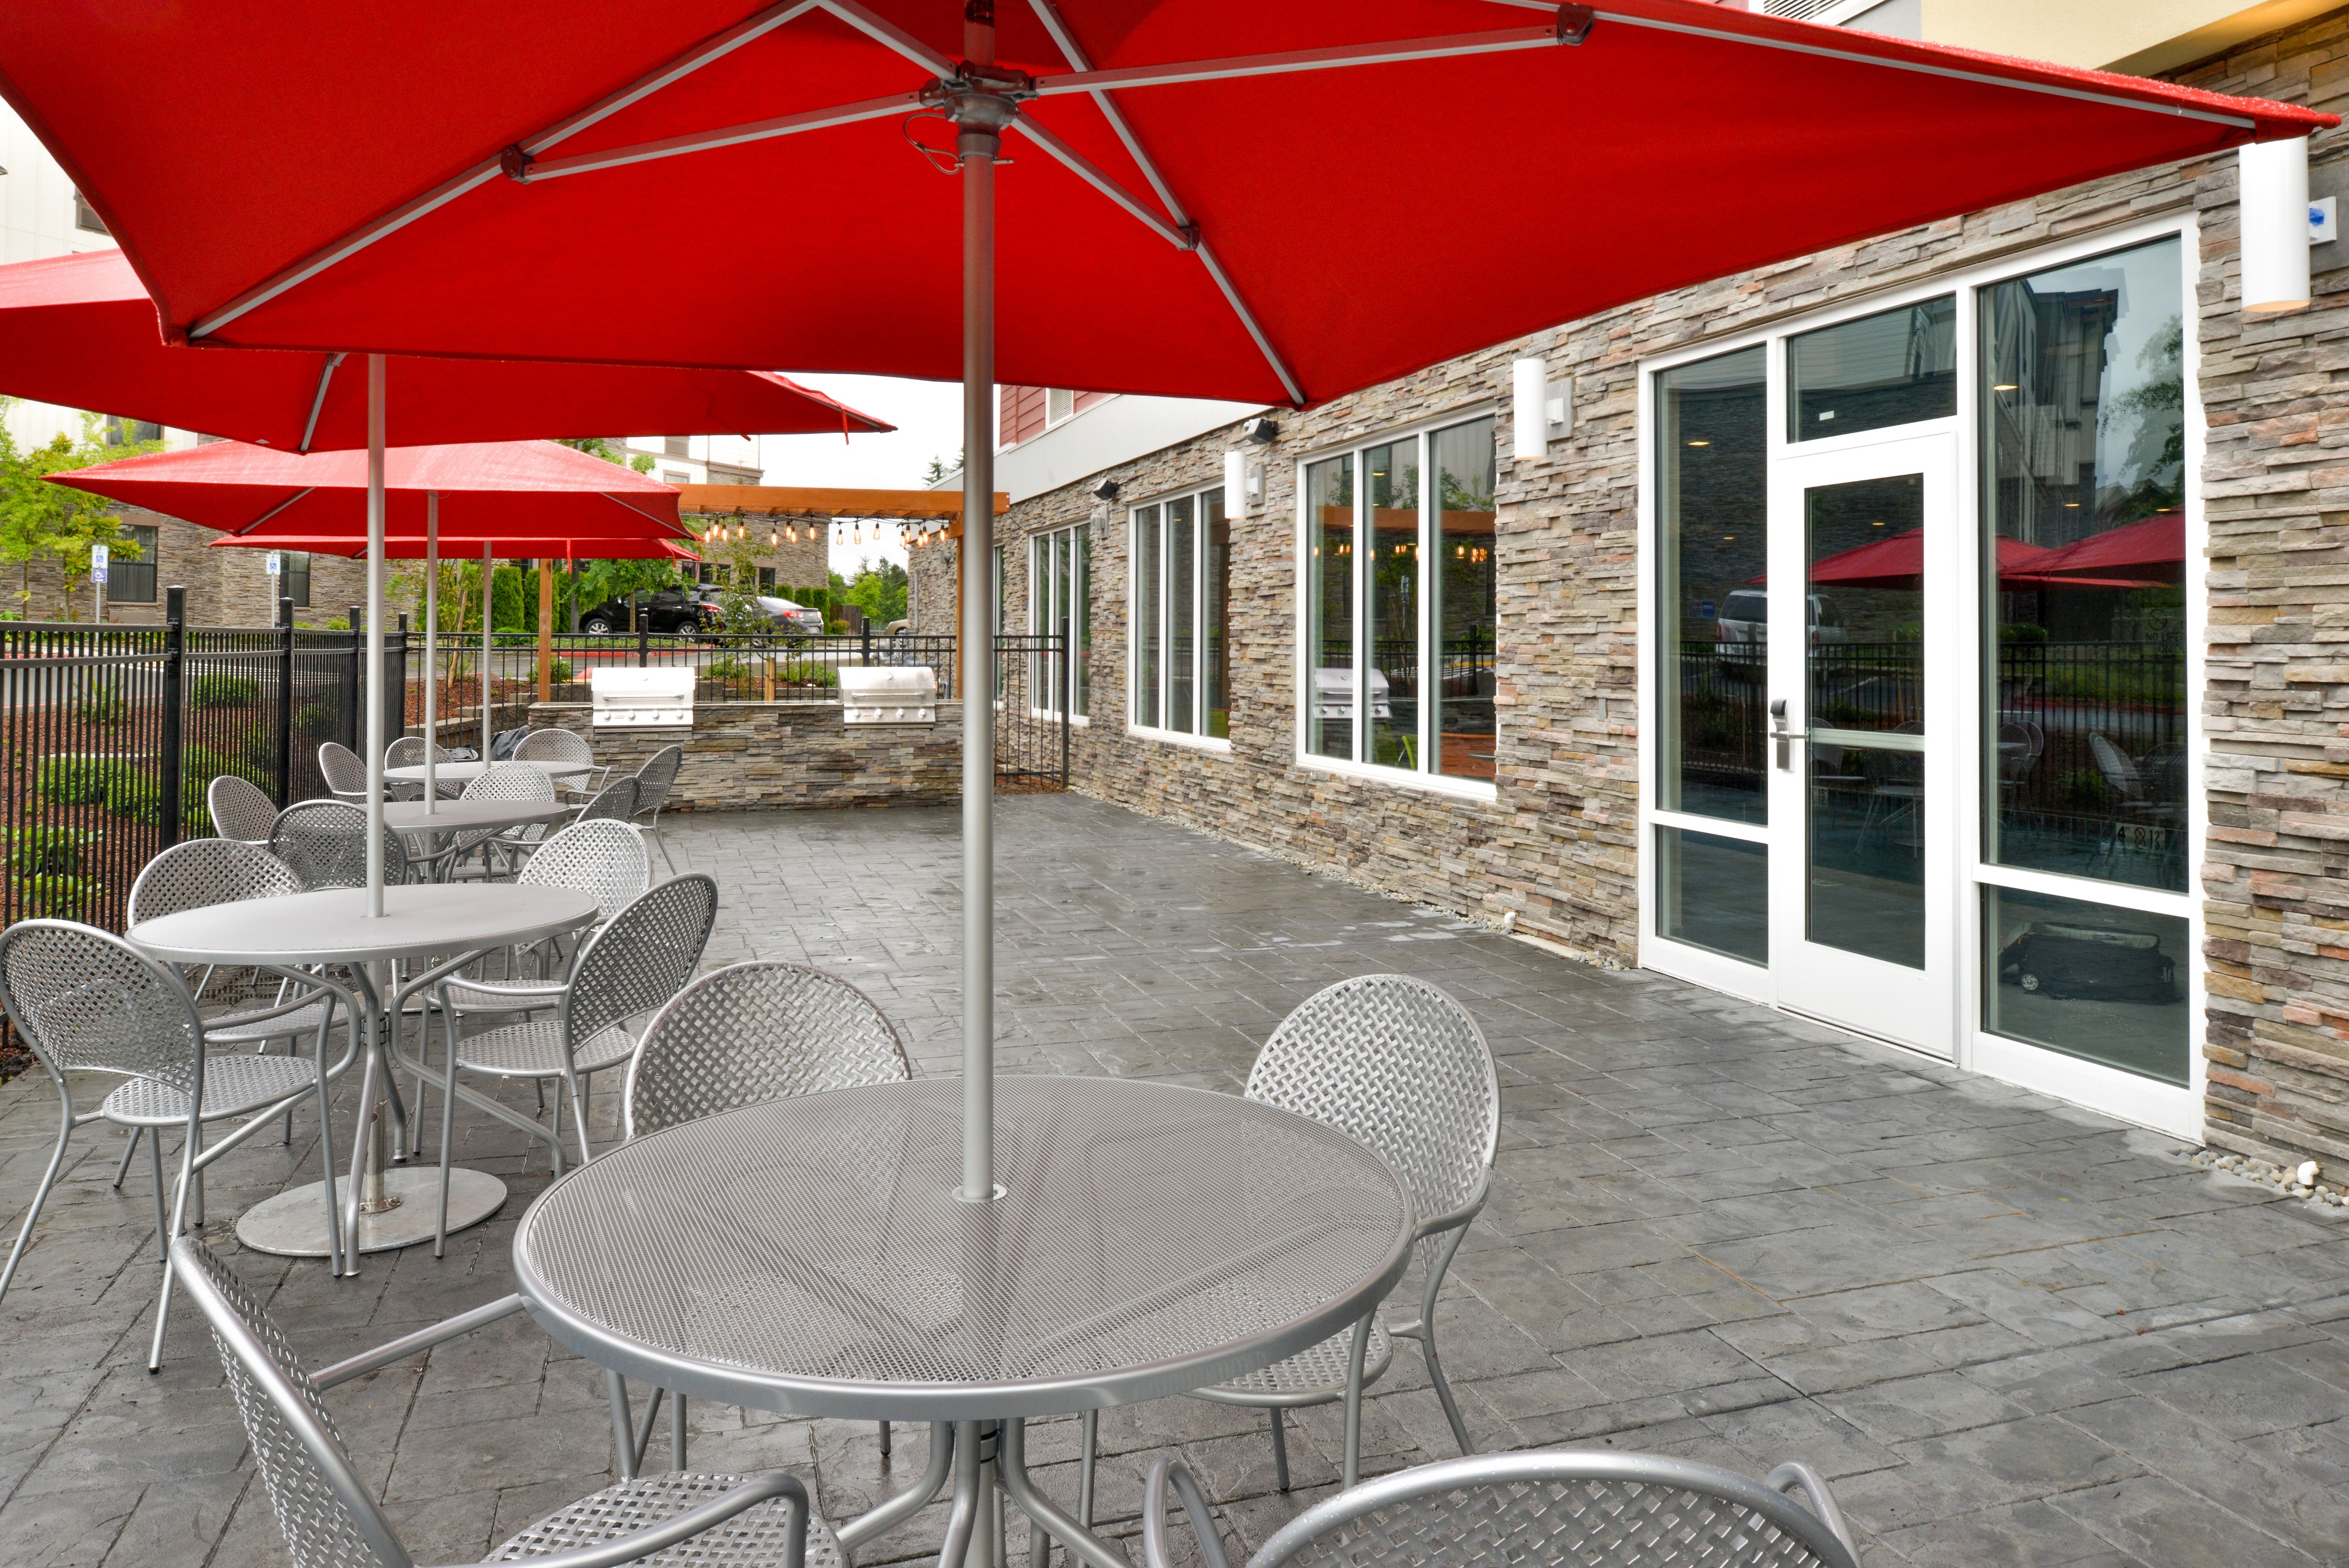 Hotel outdoor patio with BBQ grills and umbrella-covered dining tables